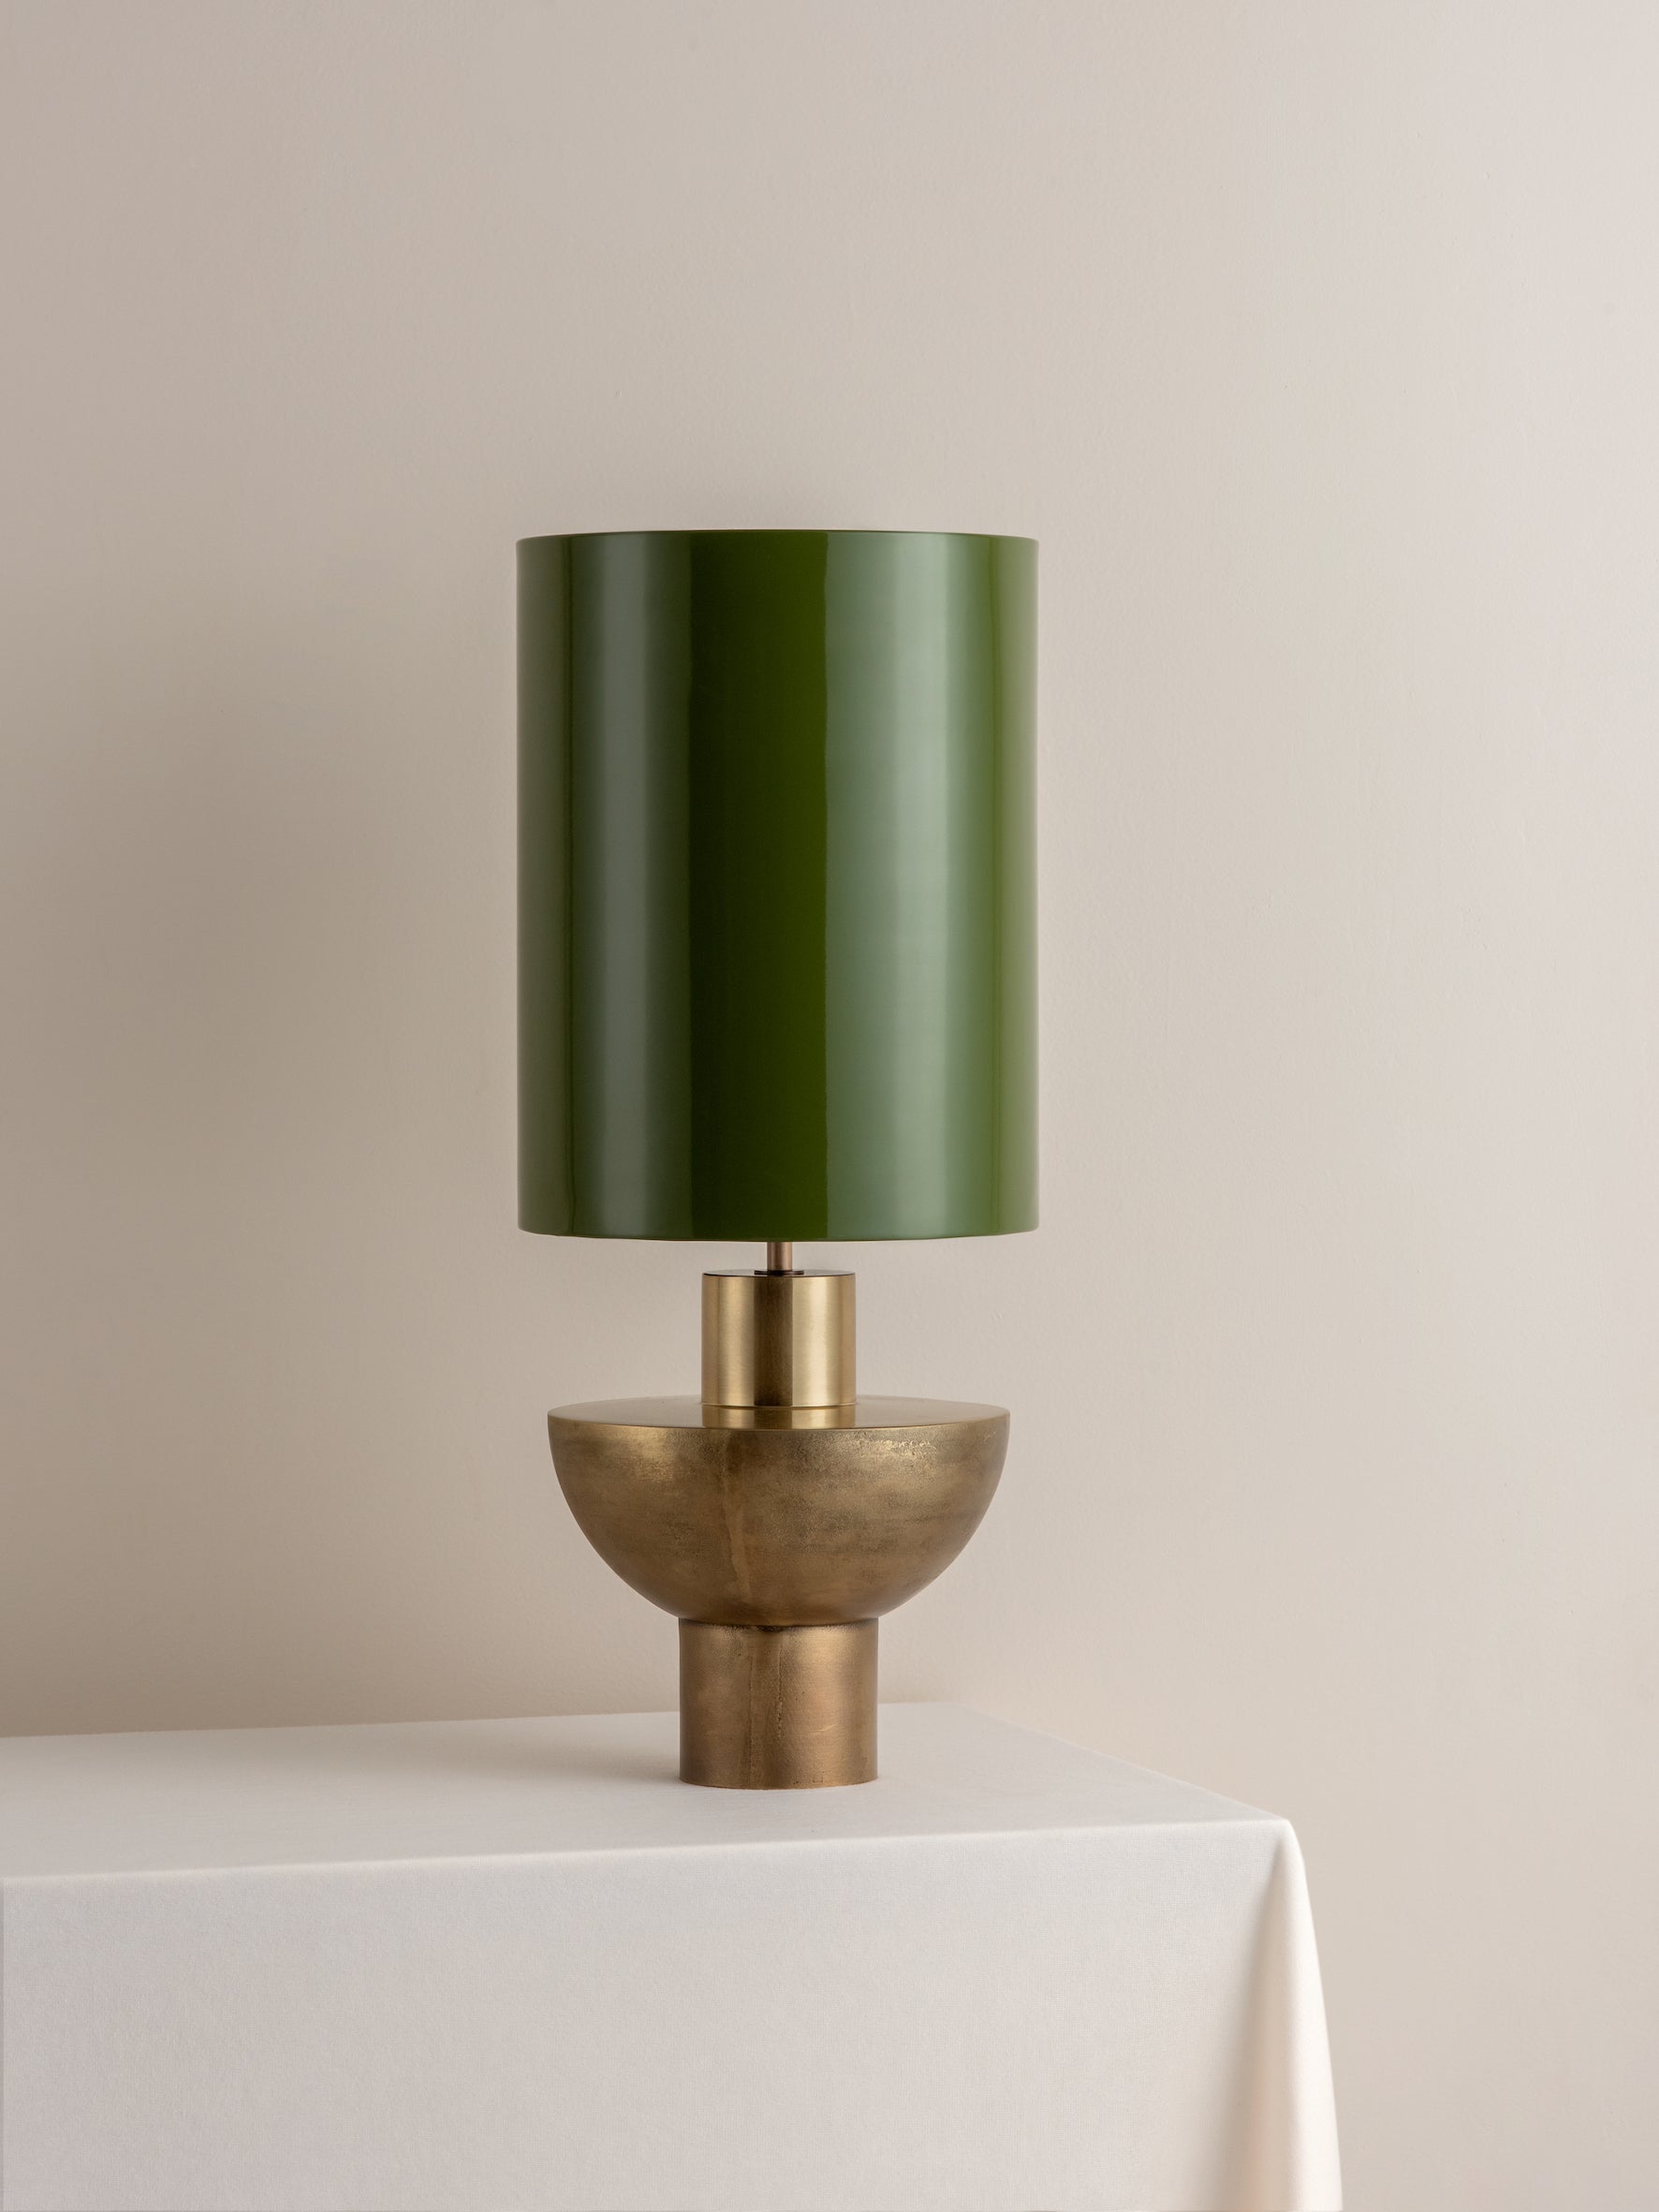 Editions brass lamp with + green lacquer shade | Table Lamp | Lights & Lamps Inc | Modern Affordable Designer Lighting | USA